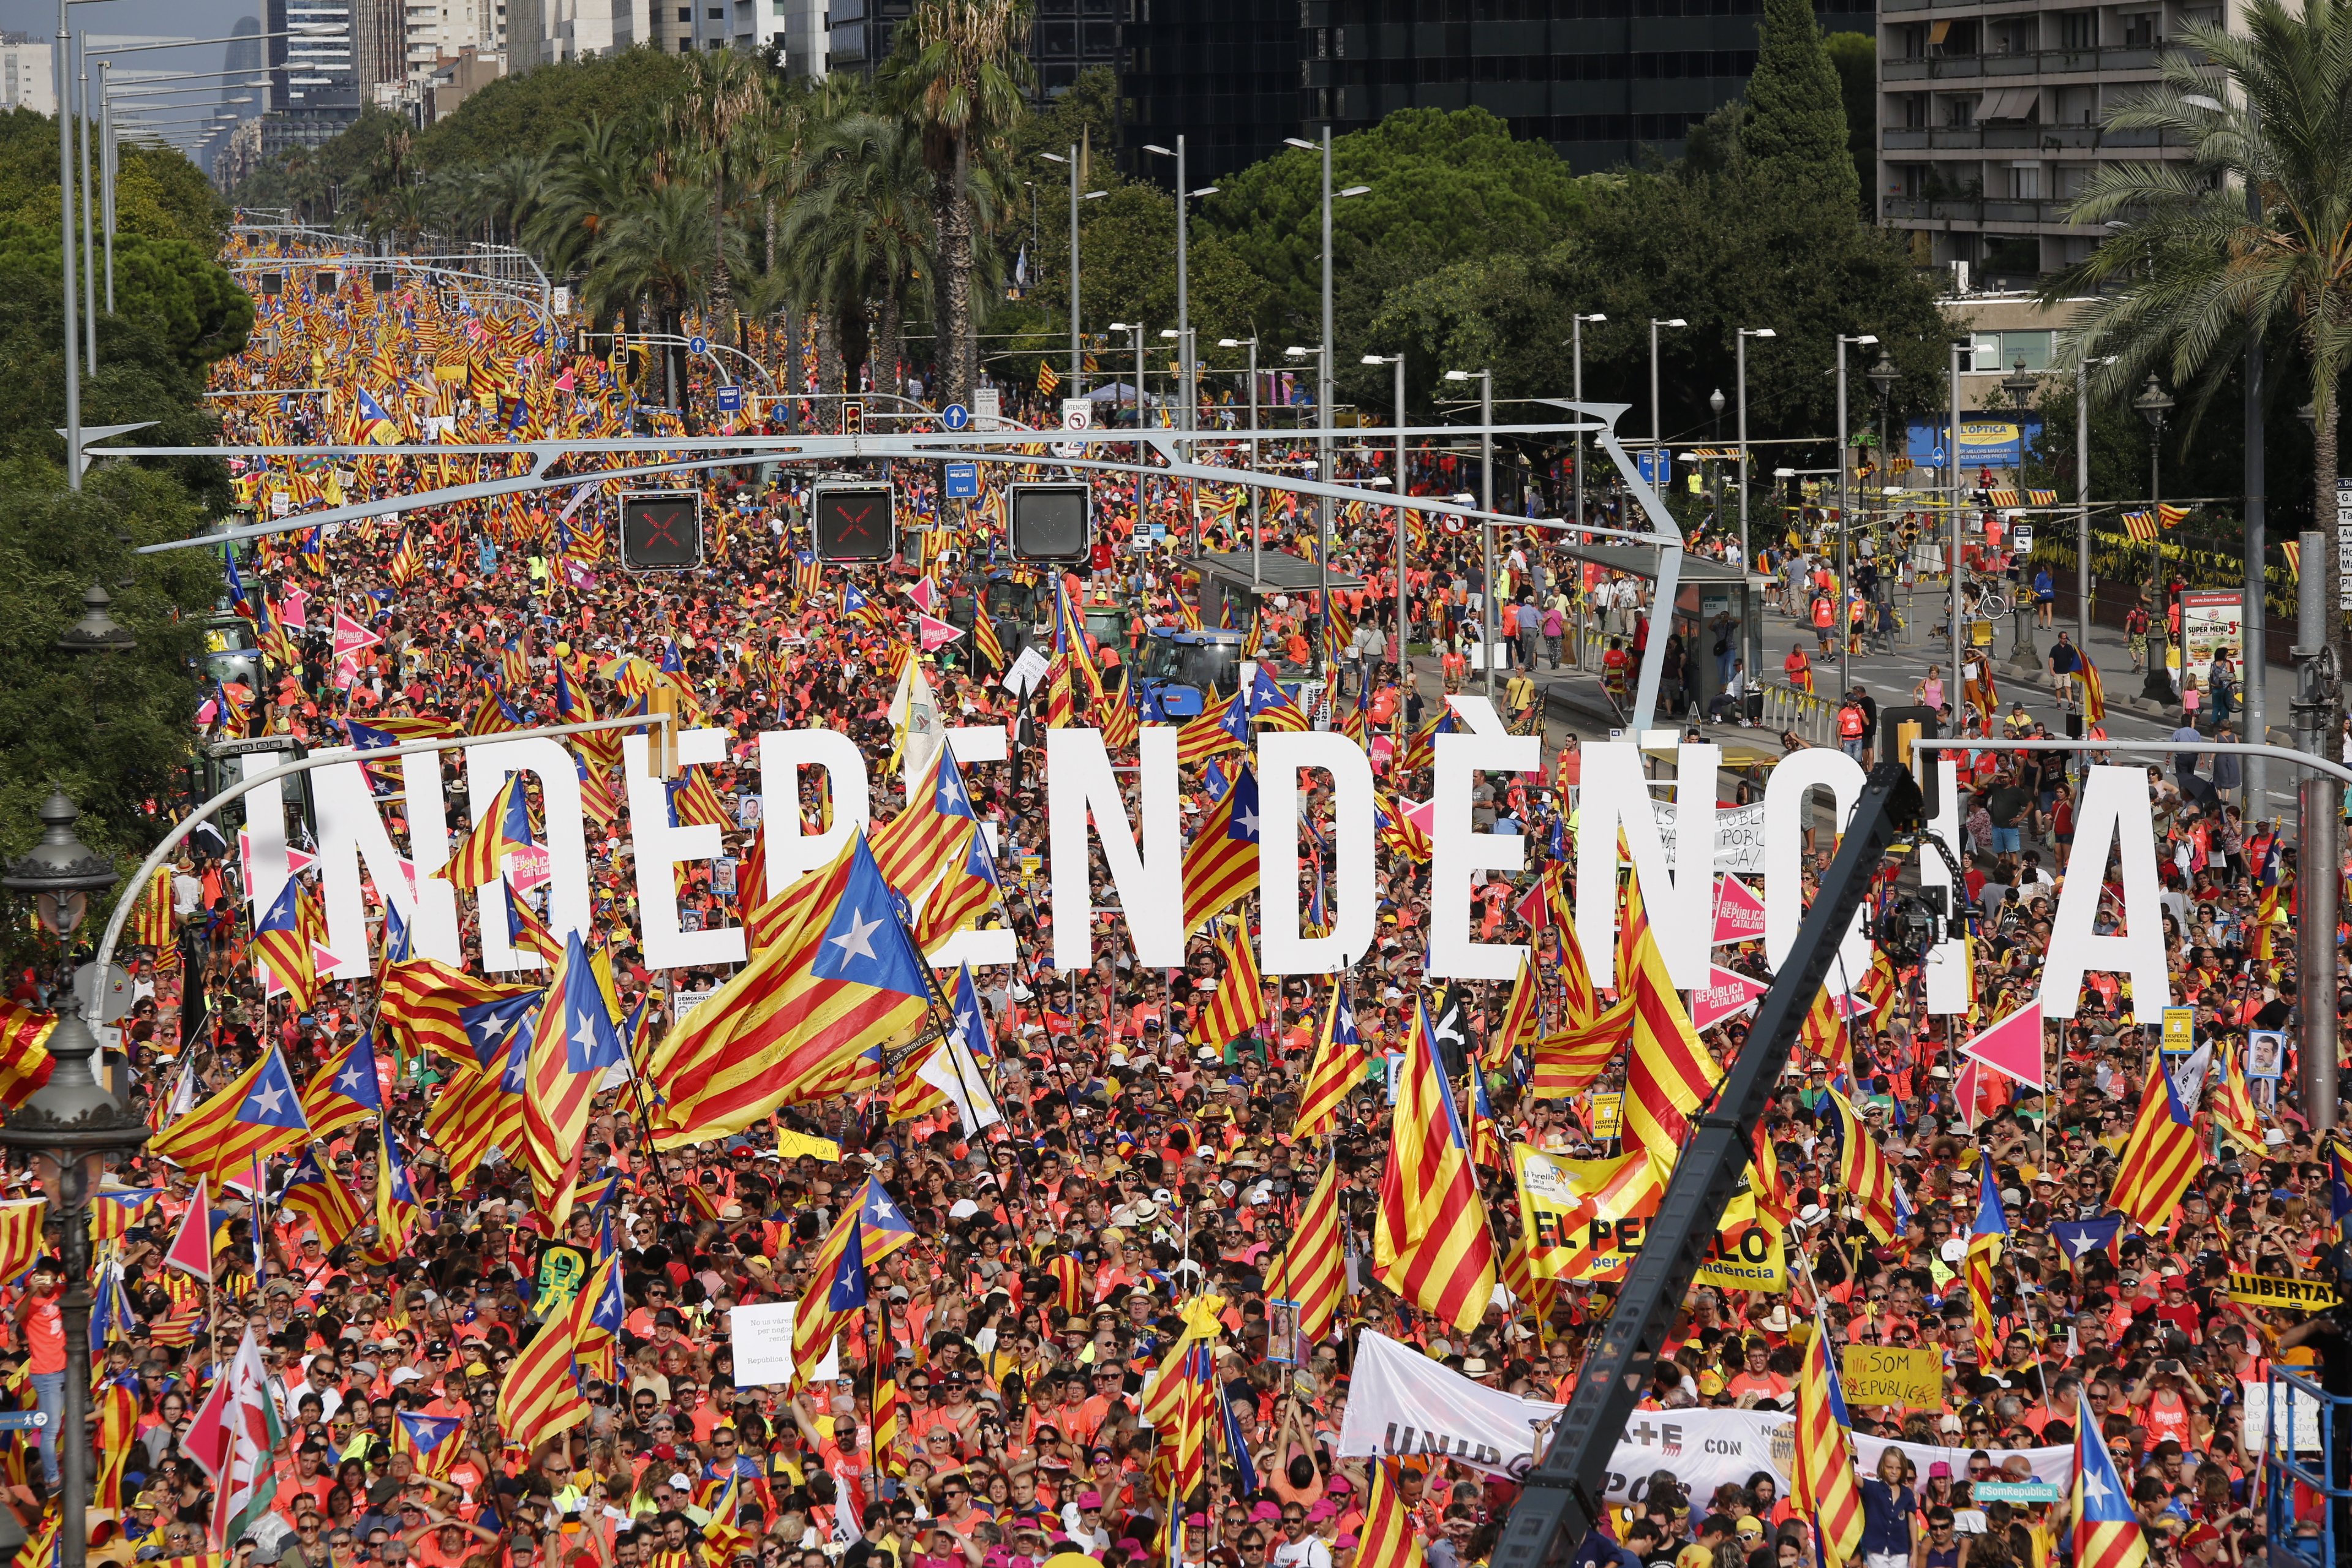 CatalanGate revealed: a major operation spying on pro-independence Catalans